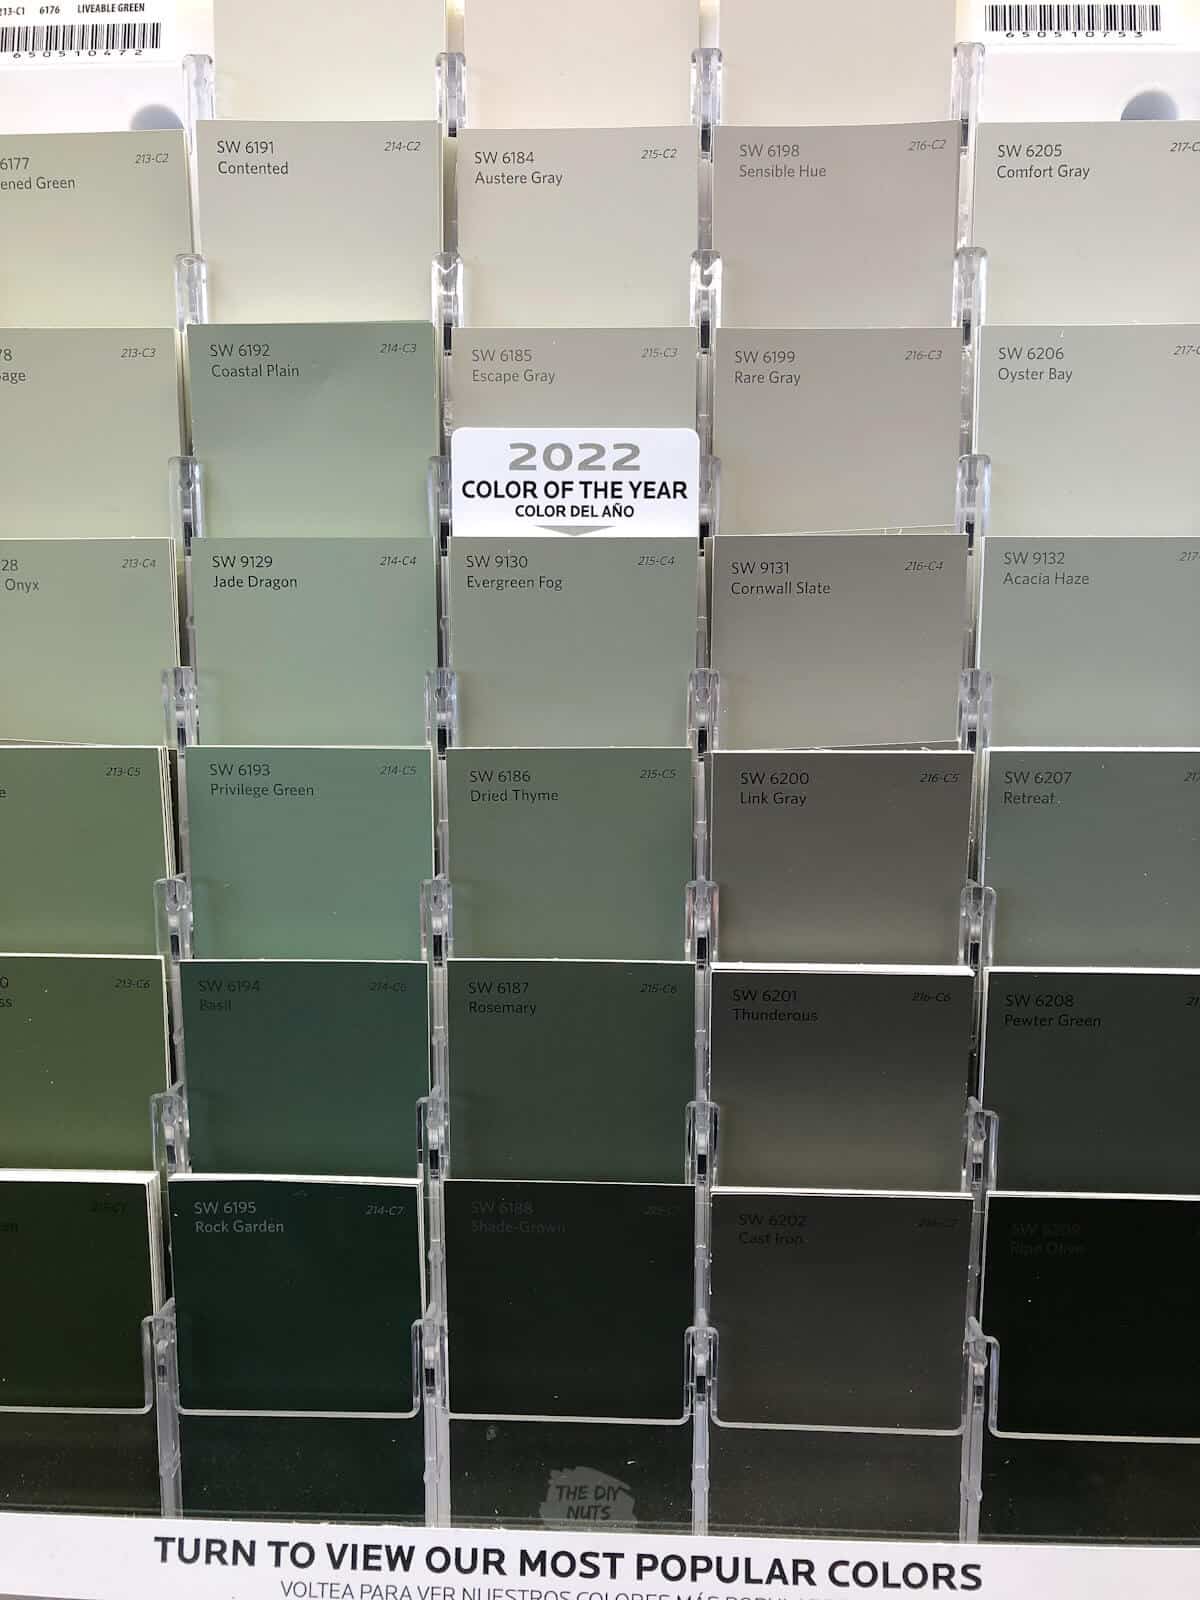 Sherwin Williams paint chips with Color of the year 2022 above Evergreen Fog